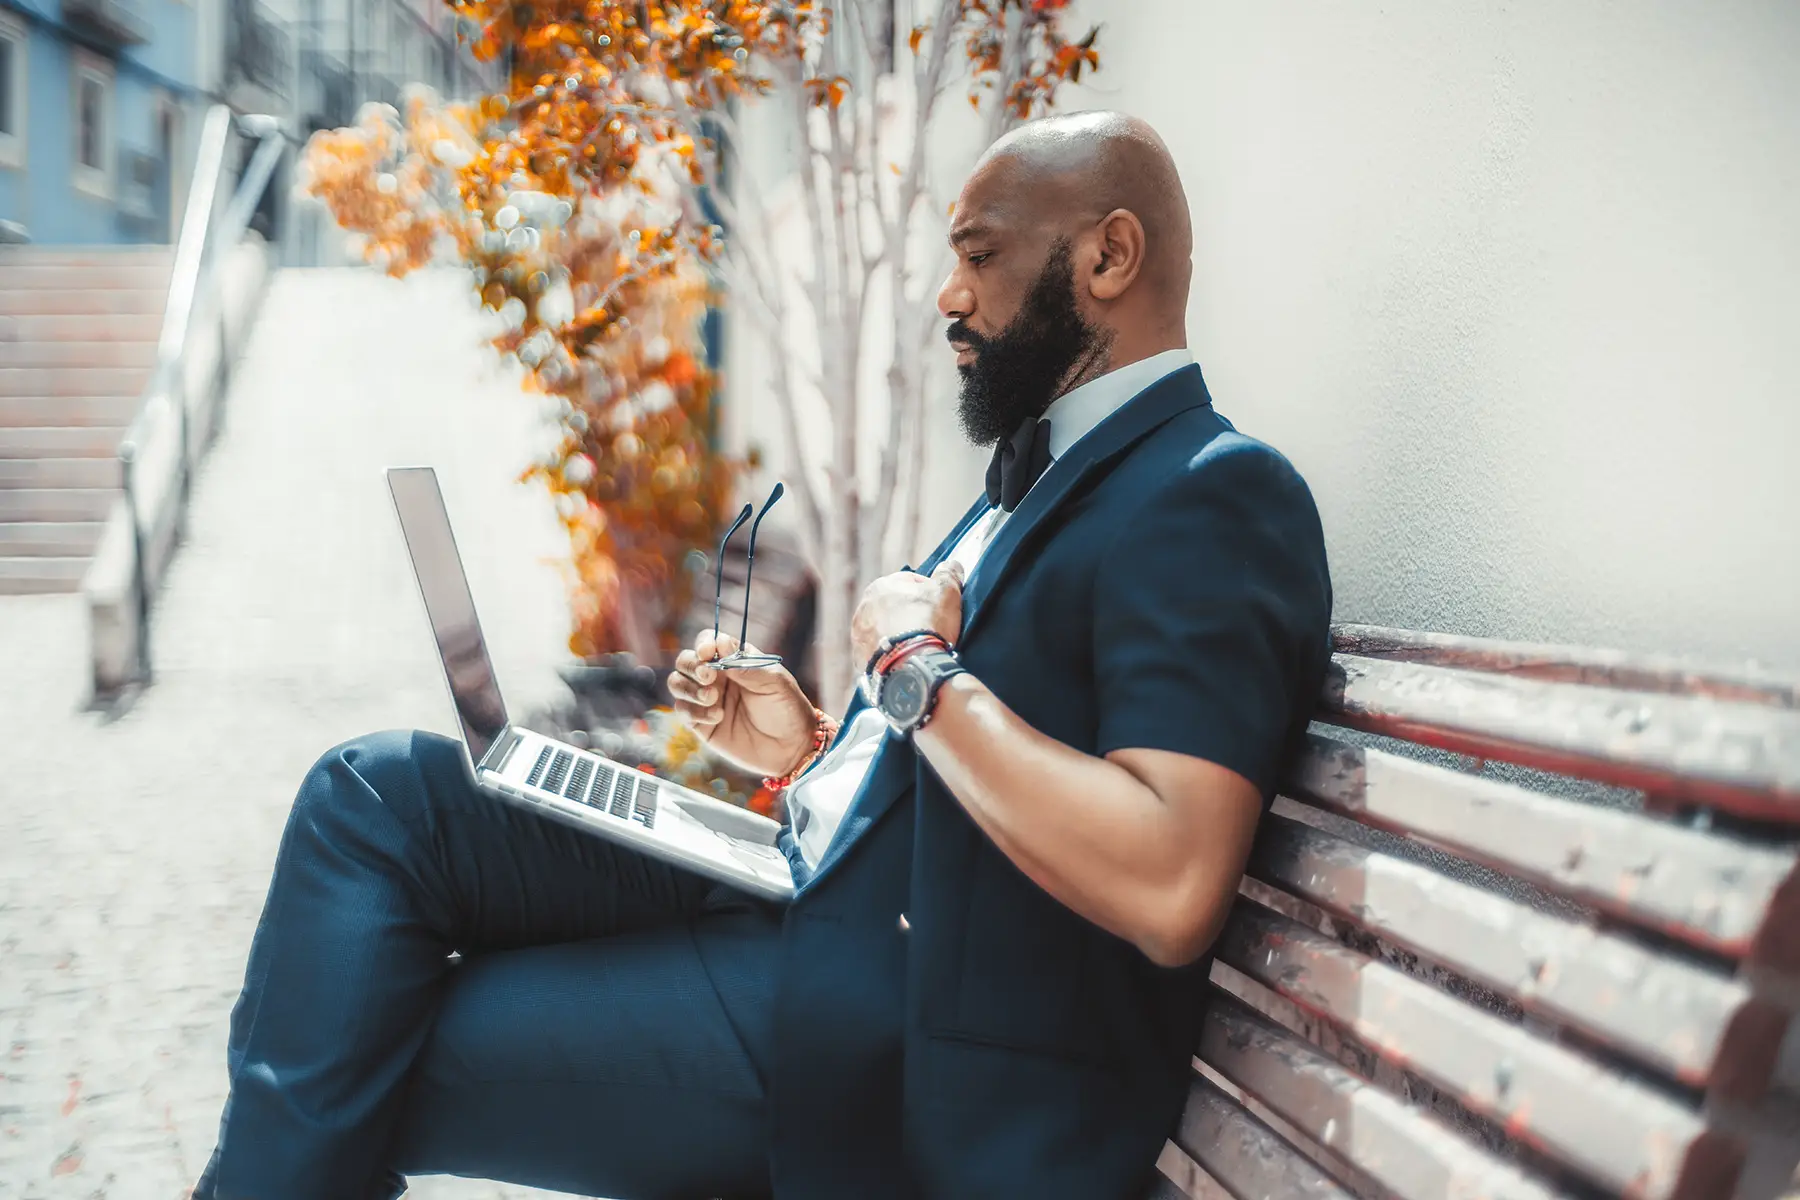 A man sitting on a bench using a laptop